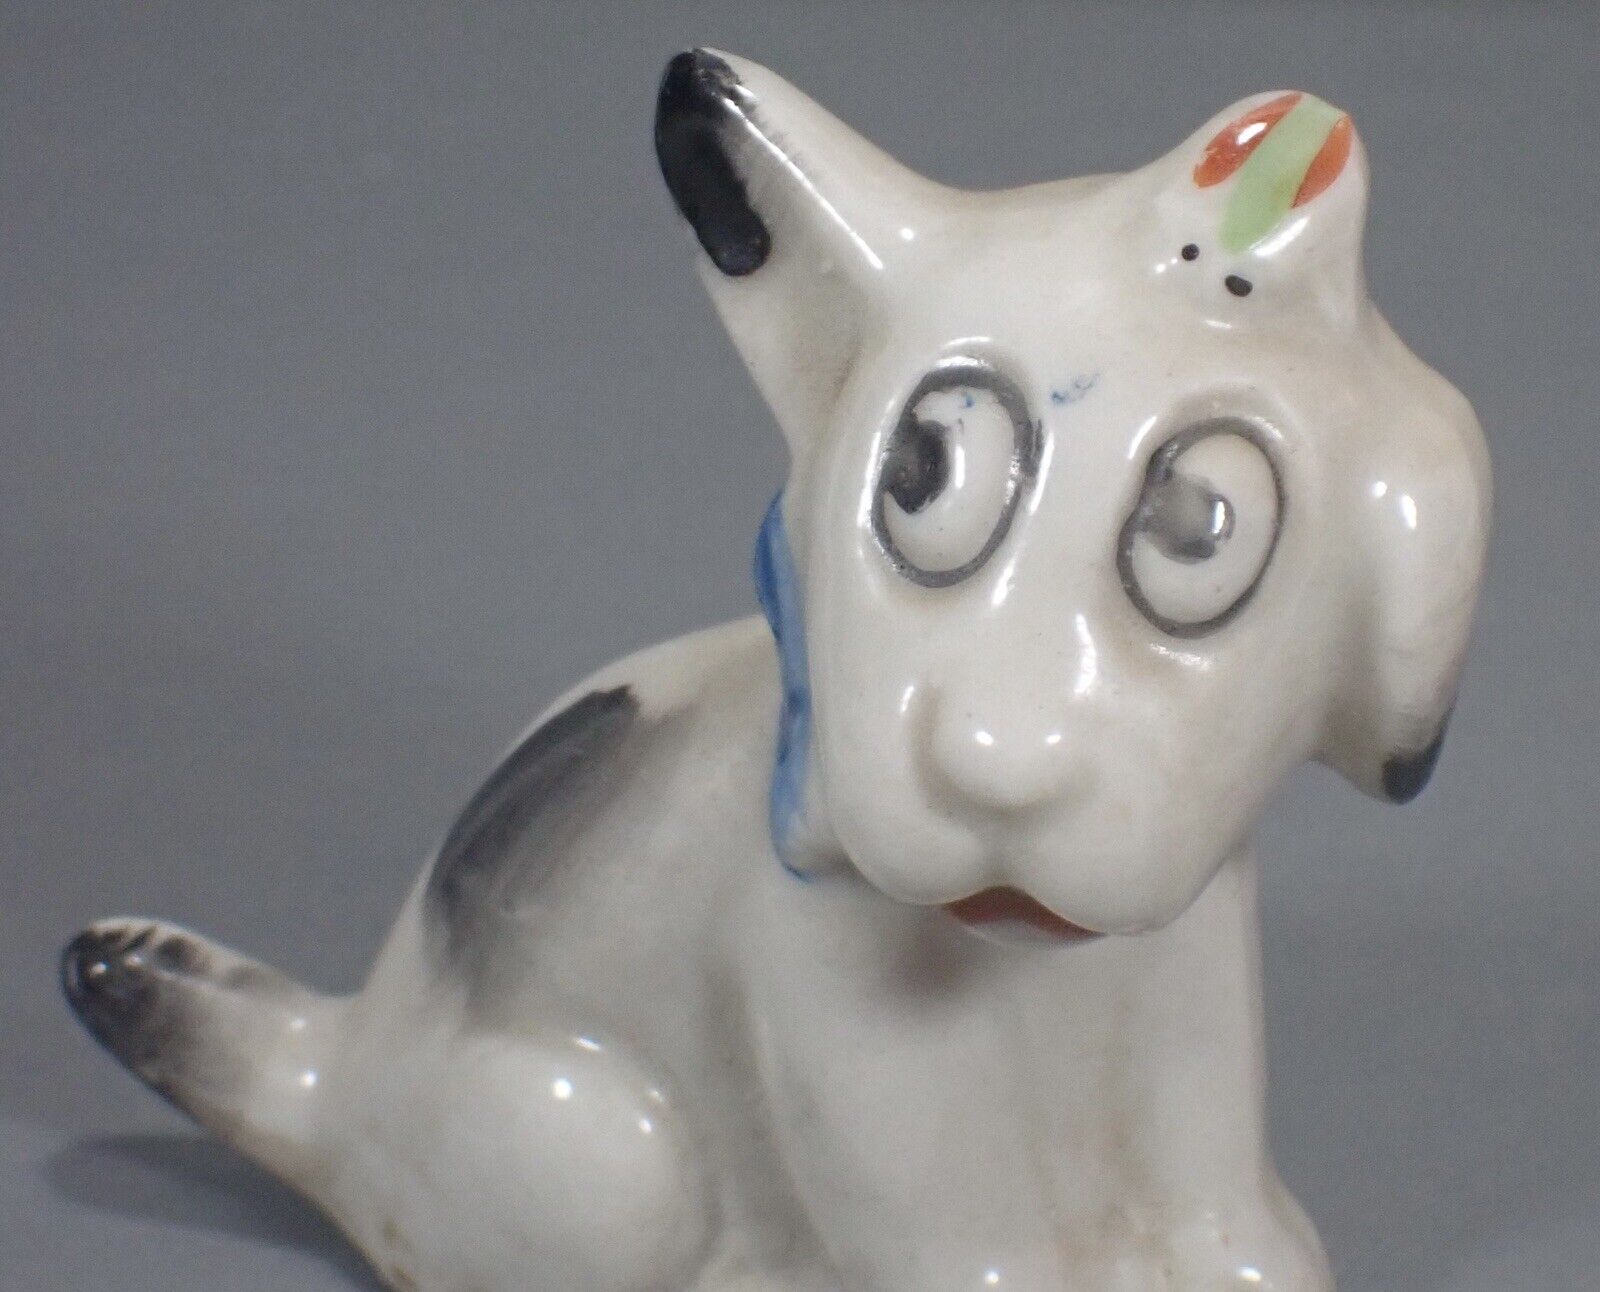 Vintage Tiny Ceramic Dog With Bug On Top Of Head